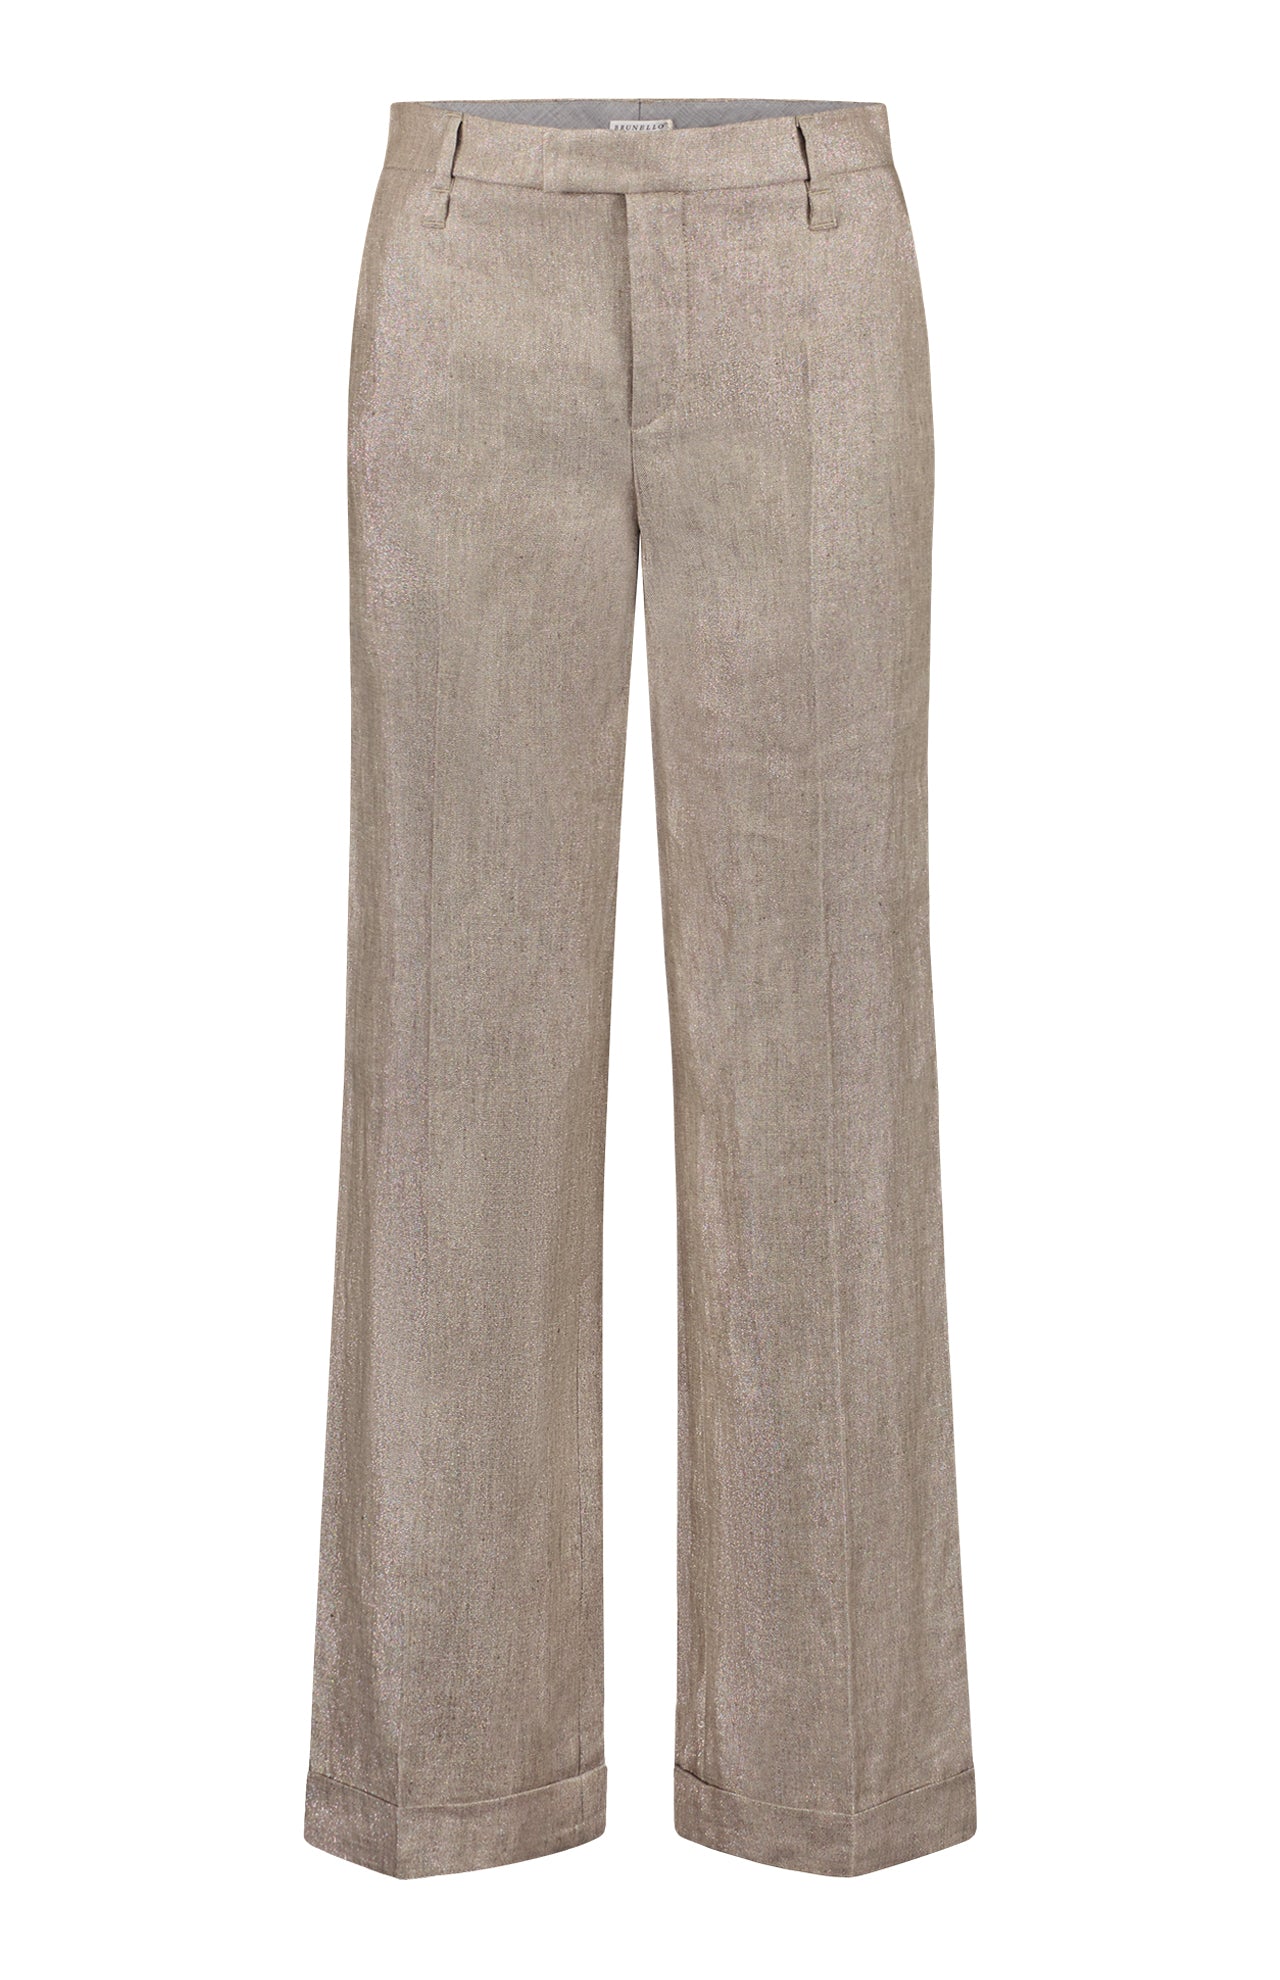 Shiny Linen Trousers with Cuff Detail (7341904429171)